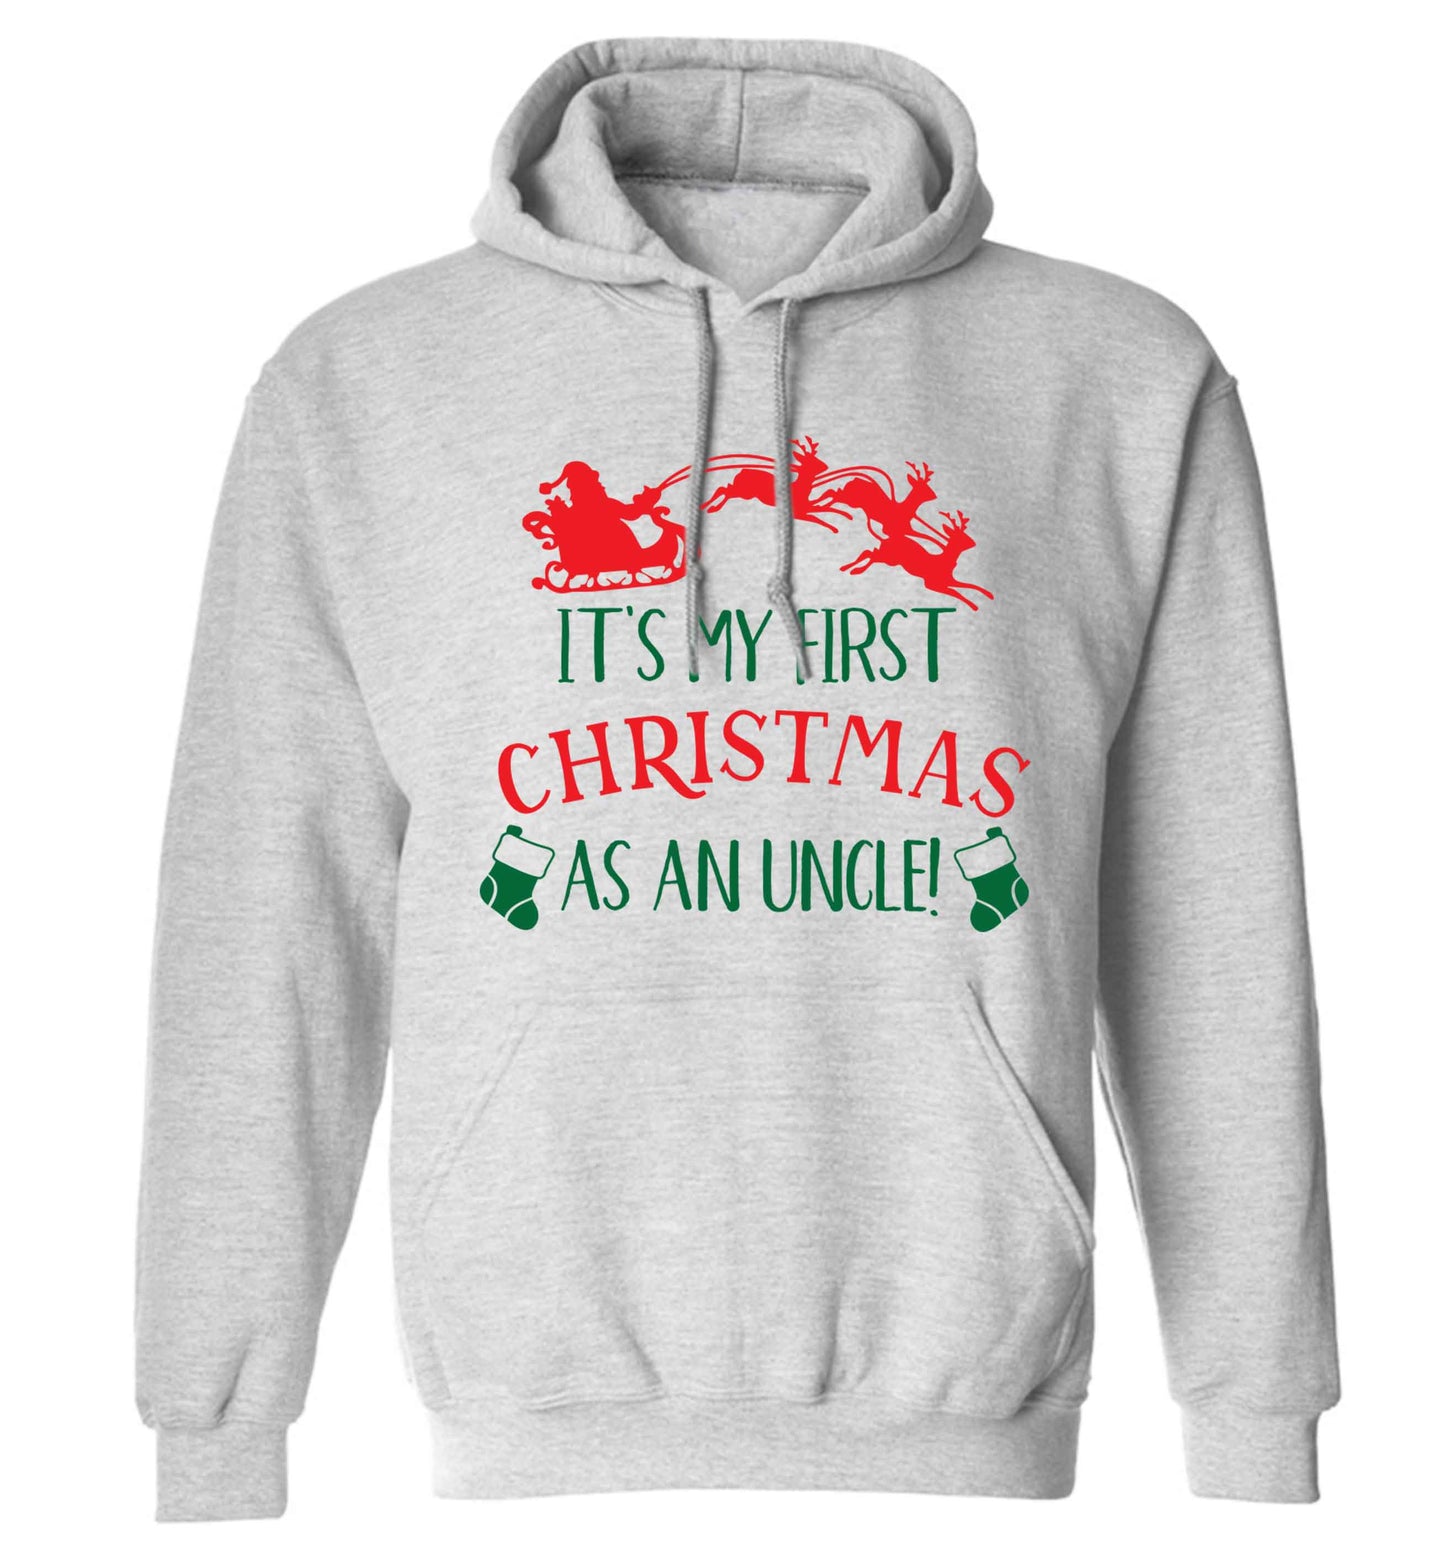 It's my first Christmas as an uncle! adults unisex grey hoodie 2XL